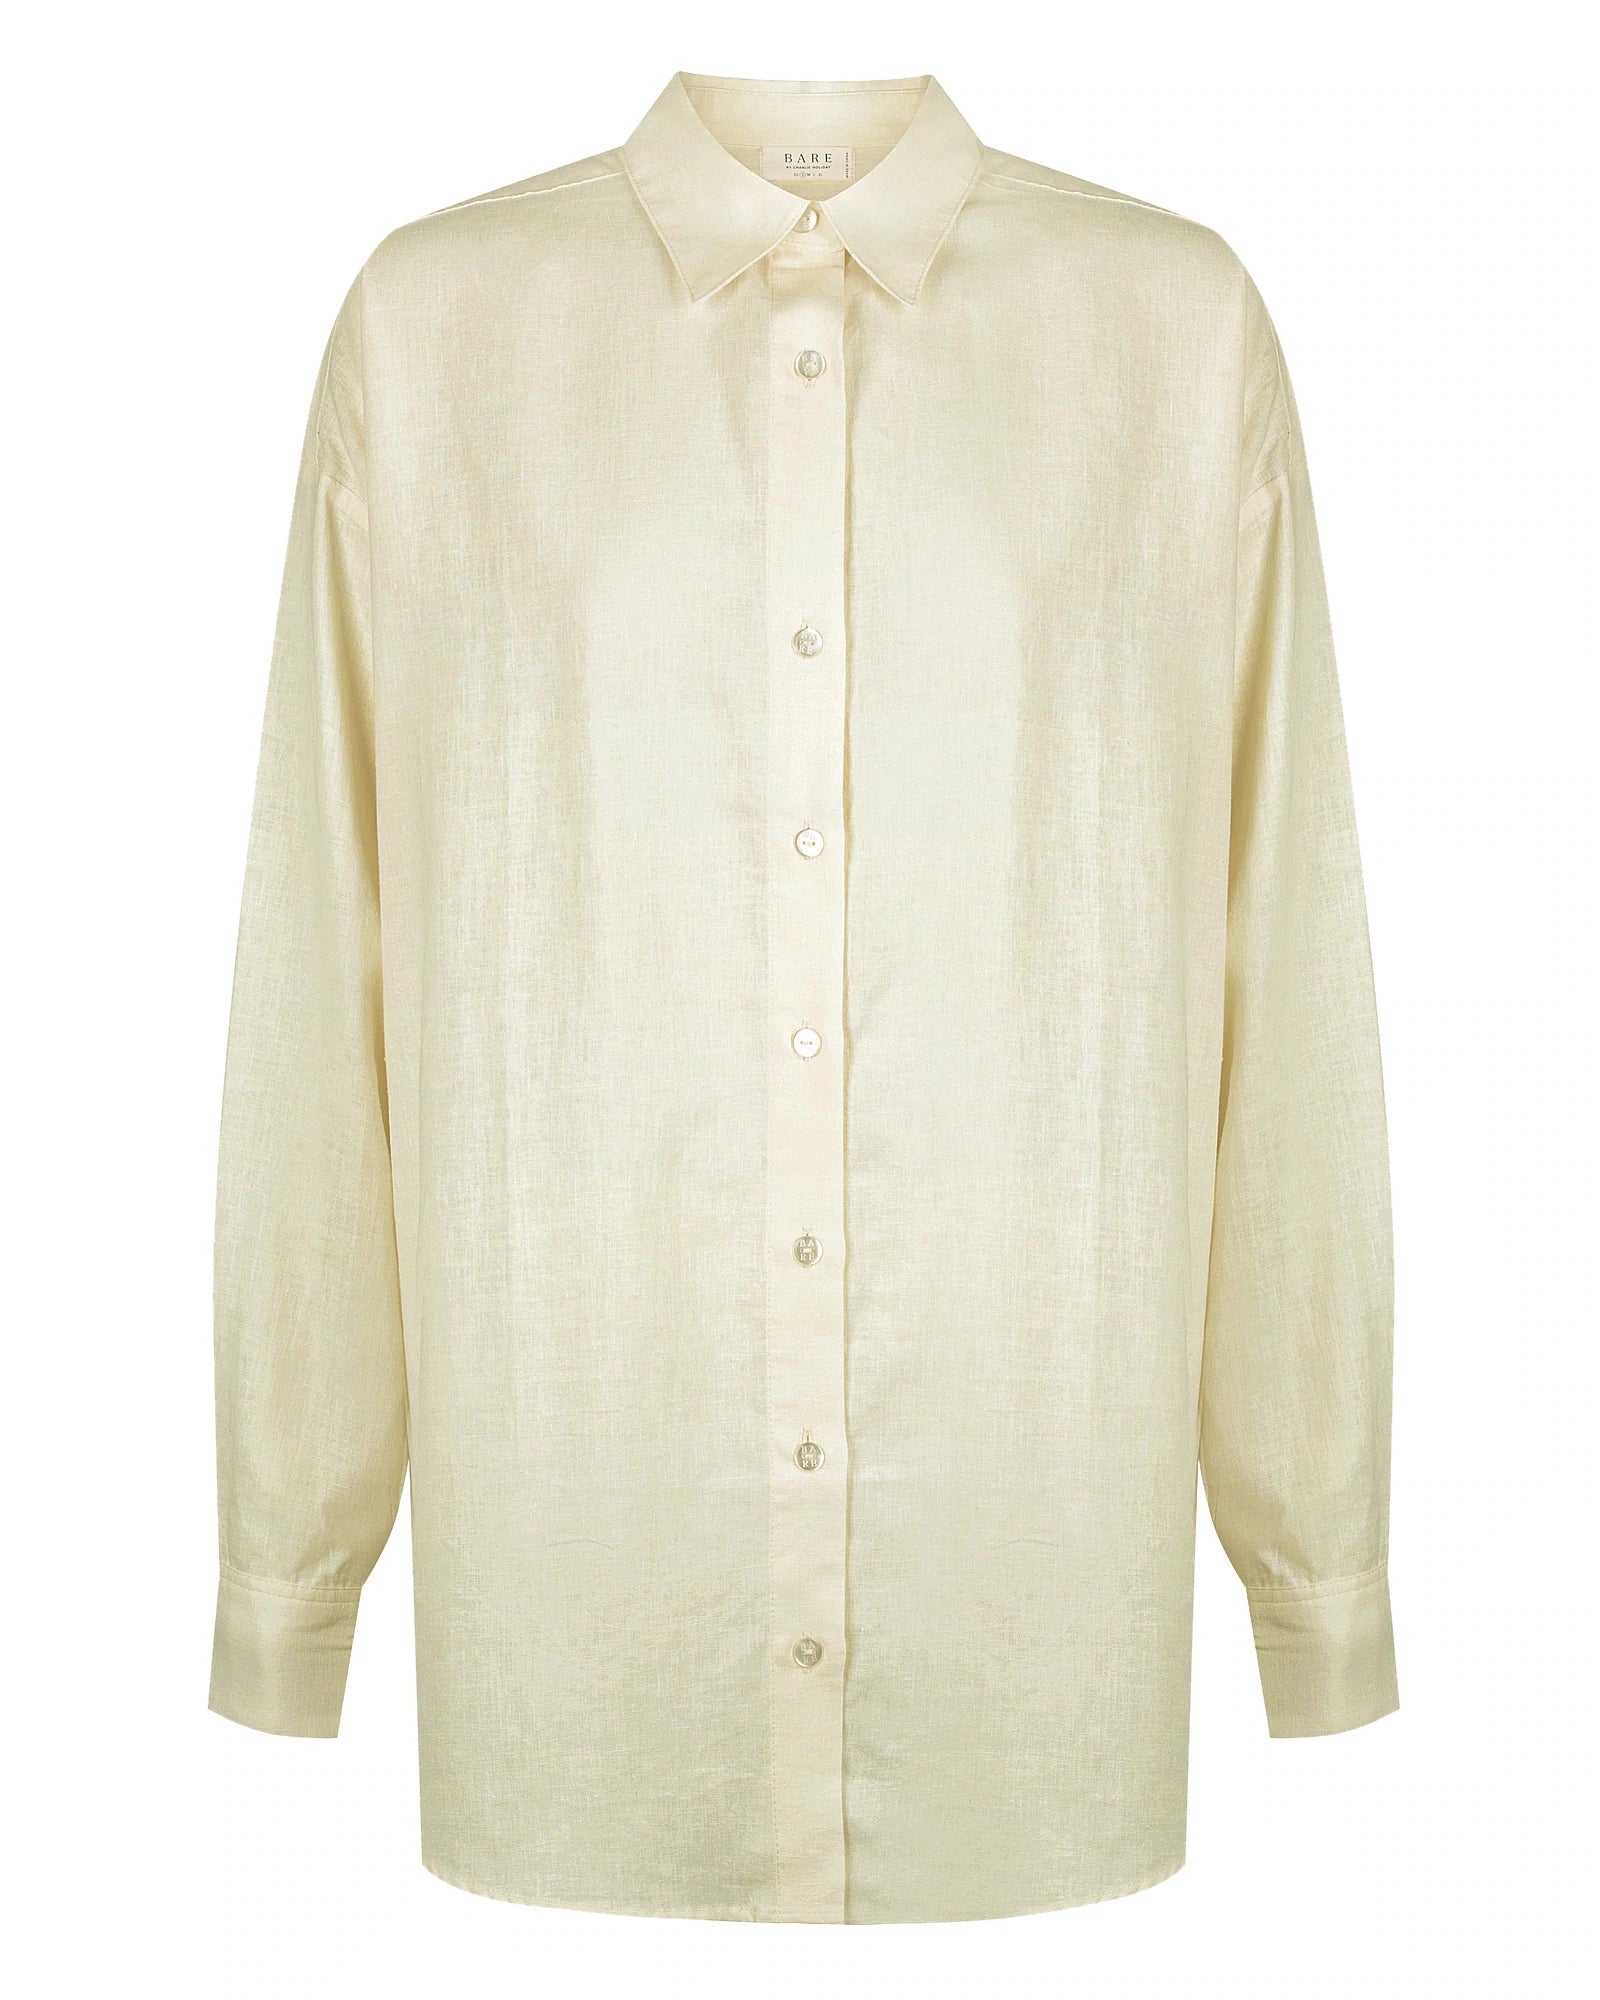 The Long Sleeve Shirt ~ was $149.95